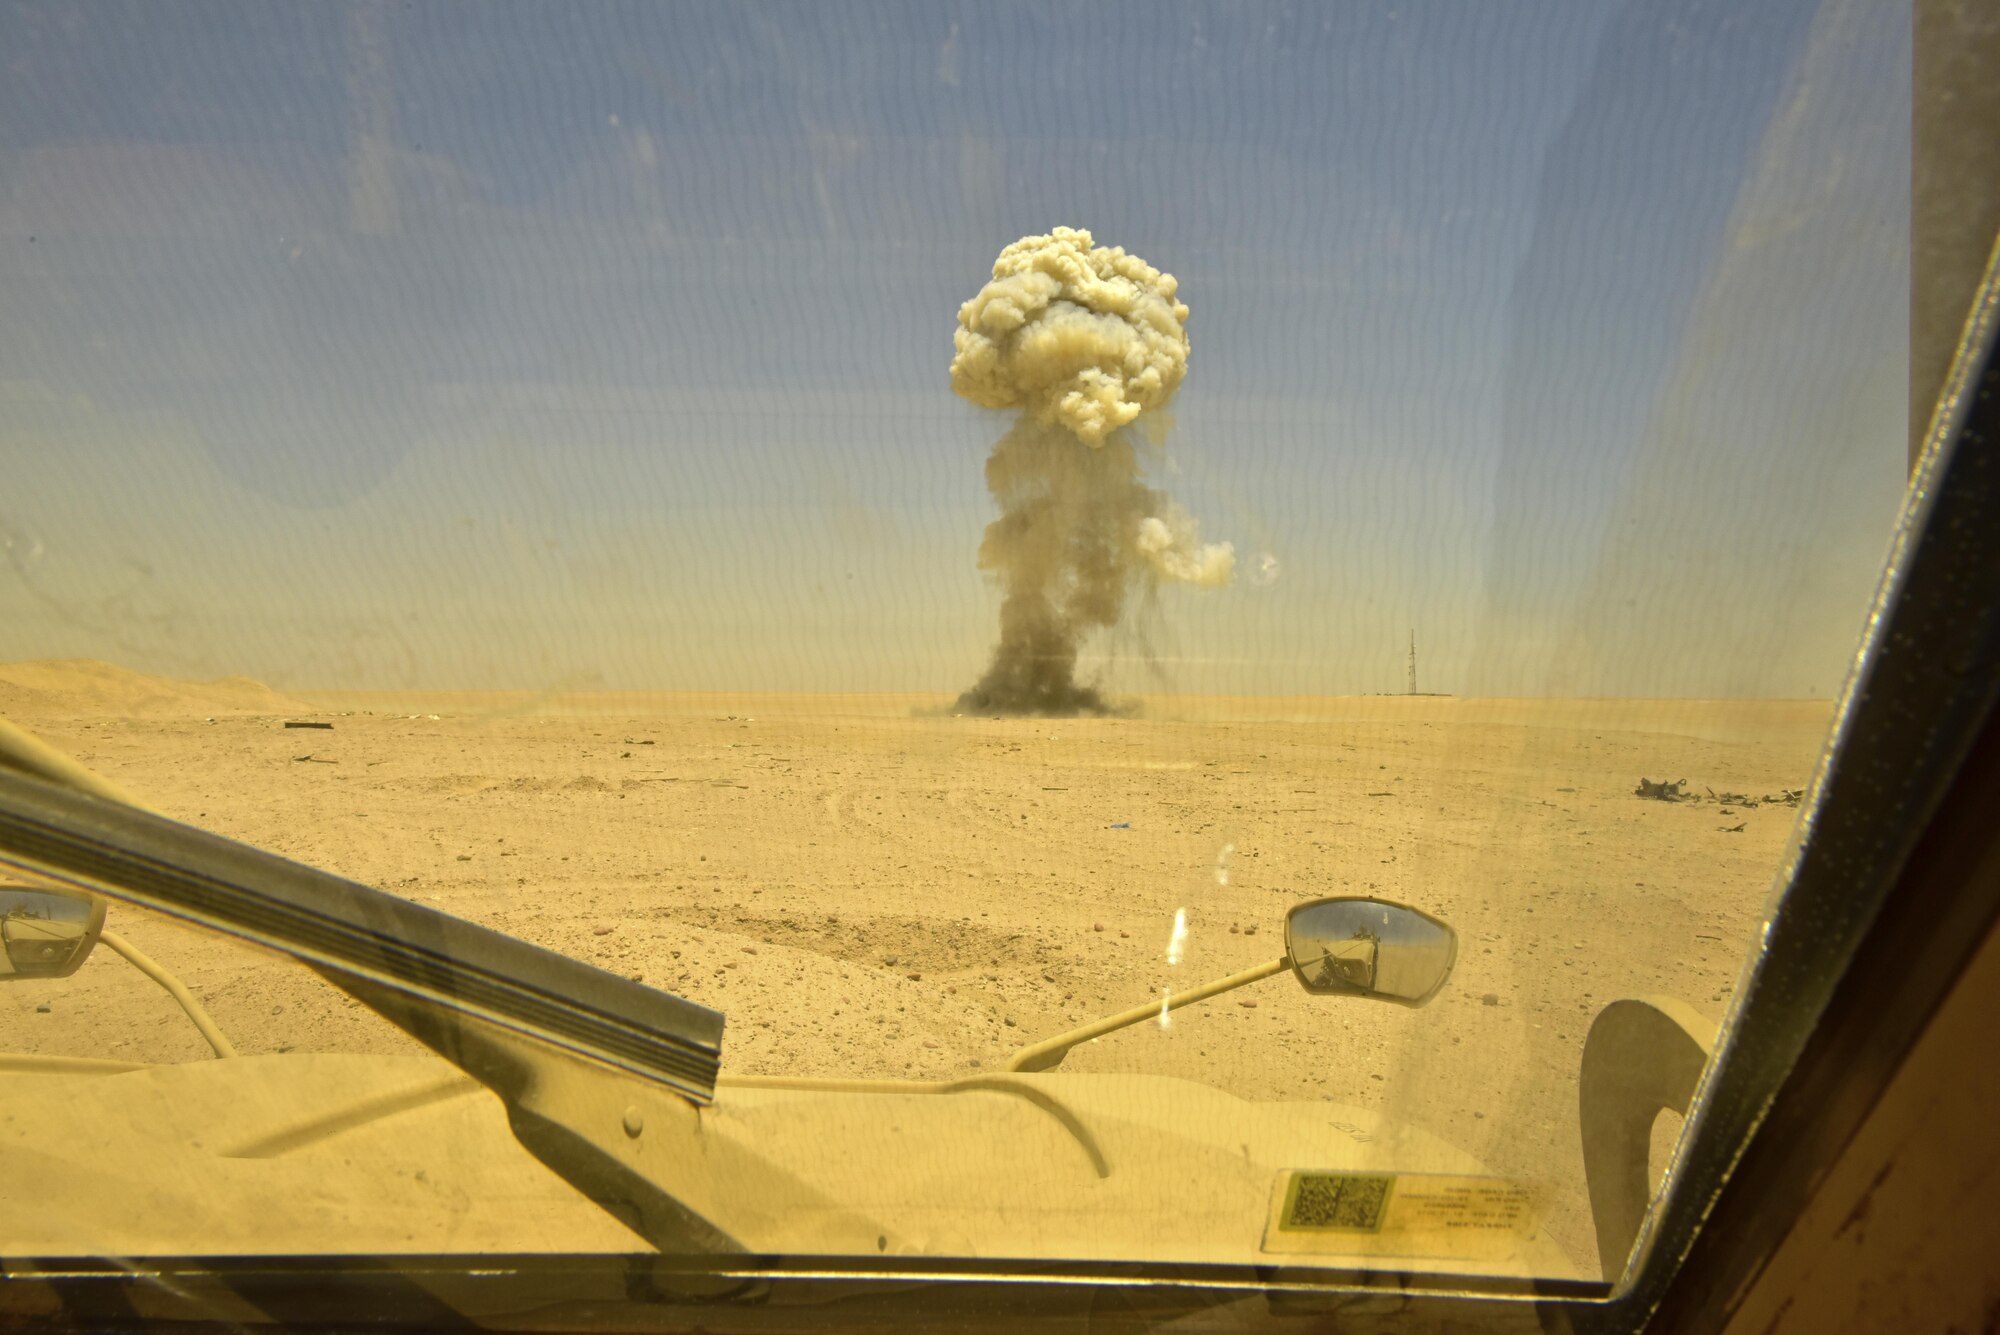 A controlled detonation blasts during a disposal operation in Southwest Asia, June 6, 2017. Personnel from the 407th Expeditionary Civil Engineer Squadron EOD, U.S. Marine Corps Special Marine Air Ground Task Force EOD and Italian Air Force completed the task of disposing of more than 5,000 pieces of expired 30 mm rounds and aircraft decoy flares. EOD’s mission is to protect personnel, resources, and the environment from hazardous explosive ordnance, improvised explosive devices and weapons of mass destruction, which may include; incendiary, chemical, biological, radiological, and nuclear hazards.  They specialize in tools, techniques and personal protective equipment to detect or identify, monitor, evaluate, interrogate, mitigate, render safe, recover, and disposal operations on ordnance or devices delivered, placed, or made dangerous by any circumstances. (U.S. Air Force photo by Senior Airman Ramon A. Adelan)